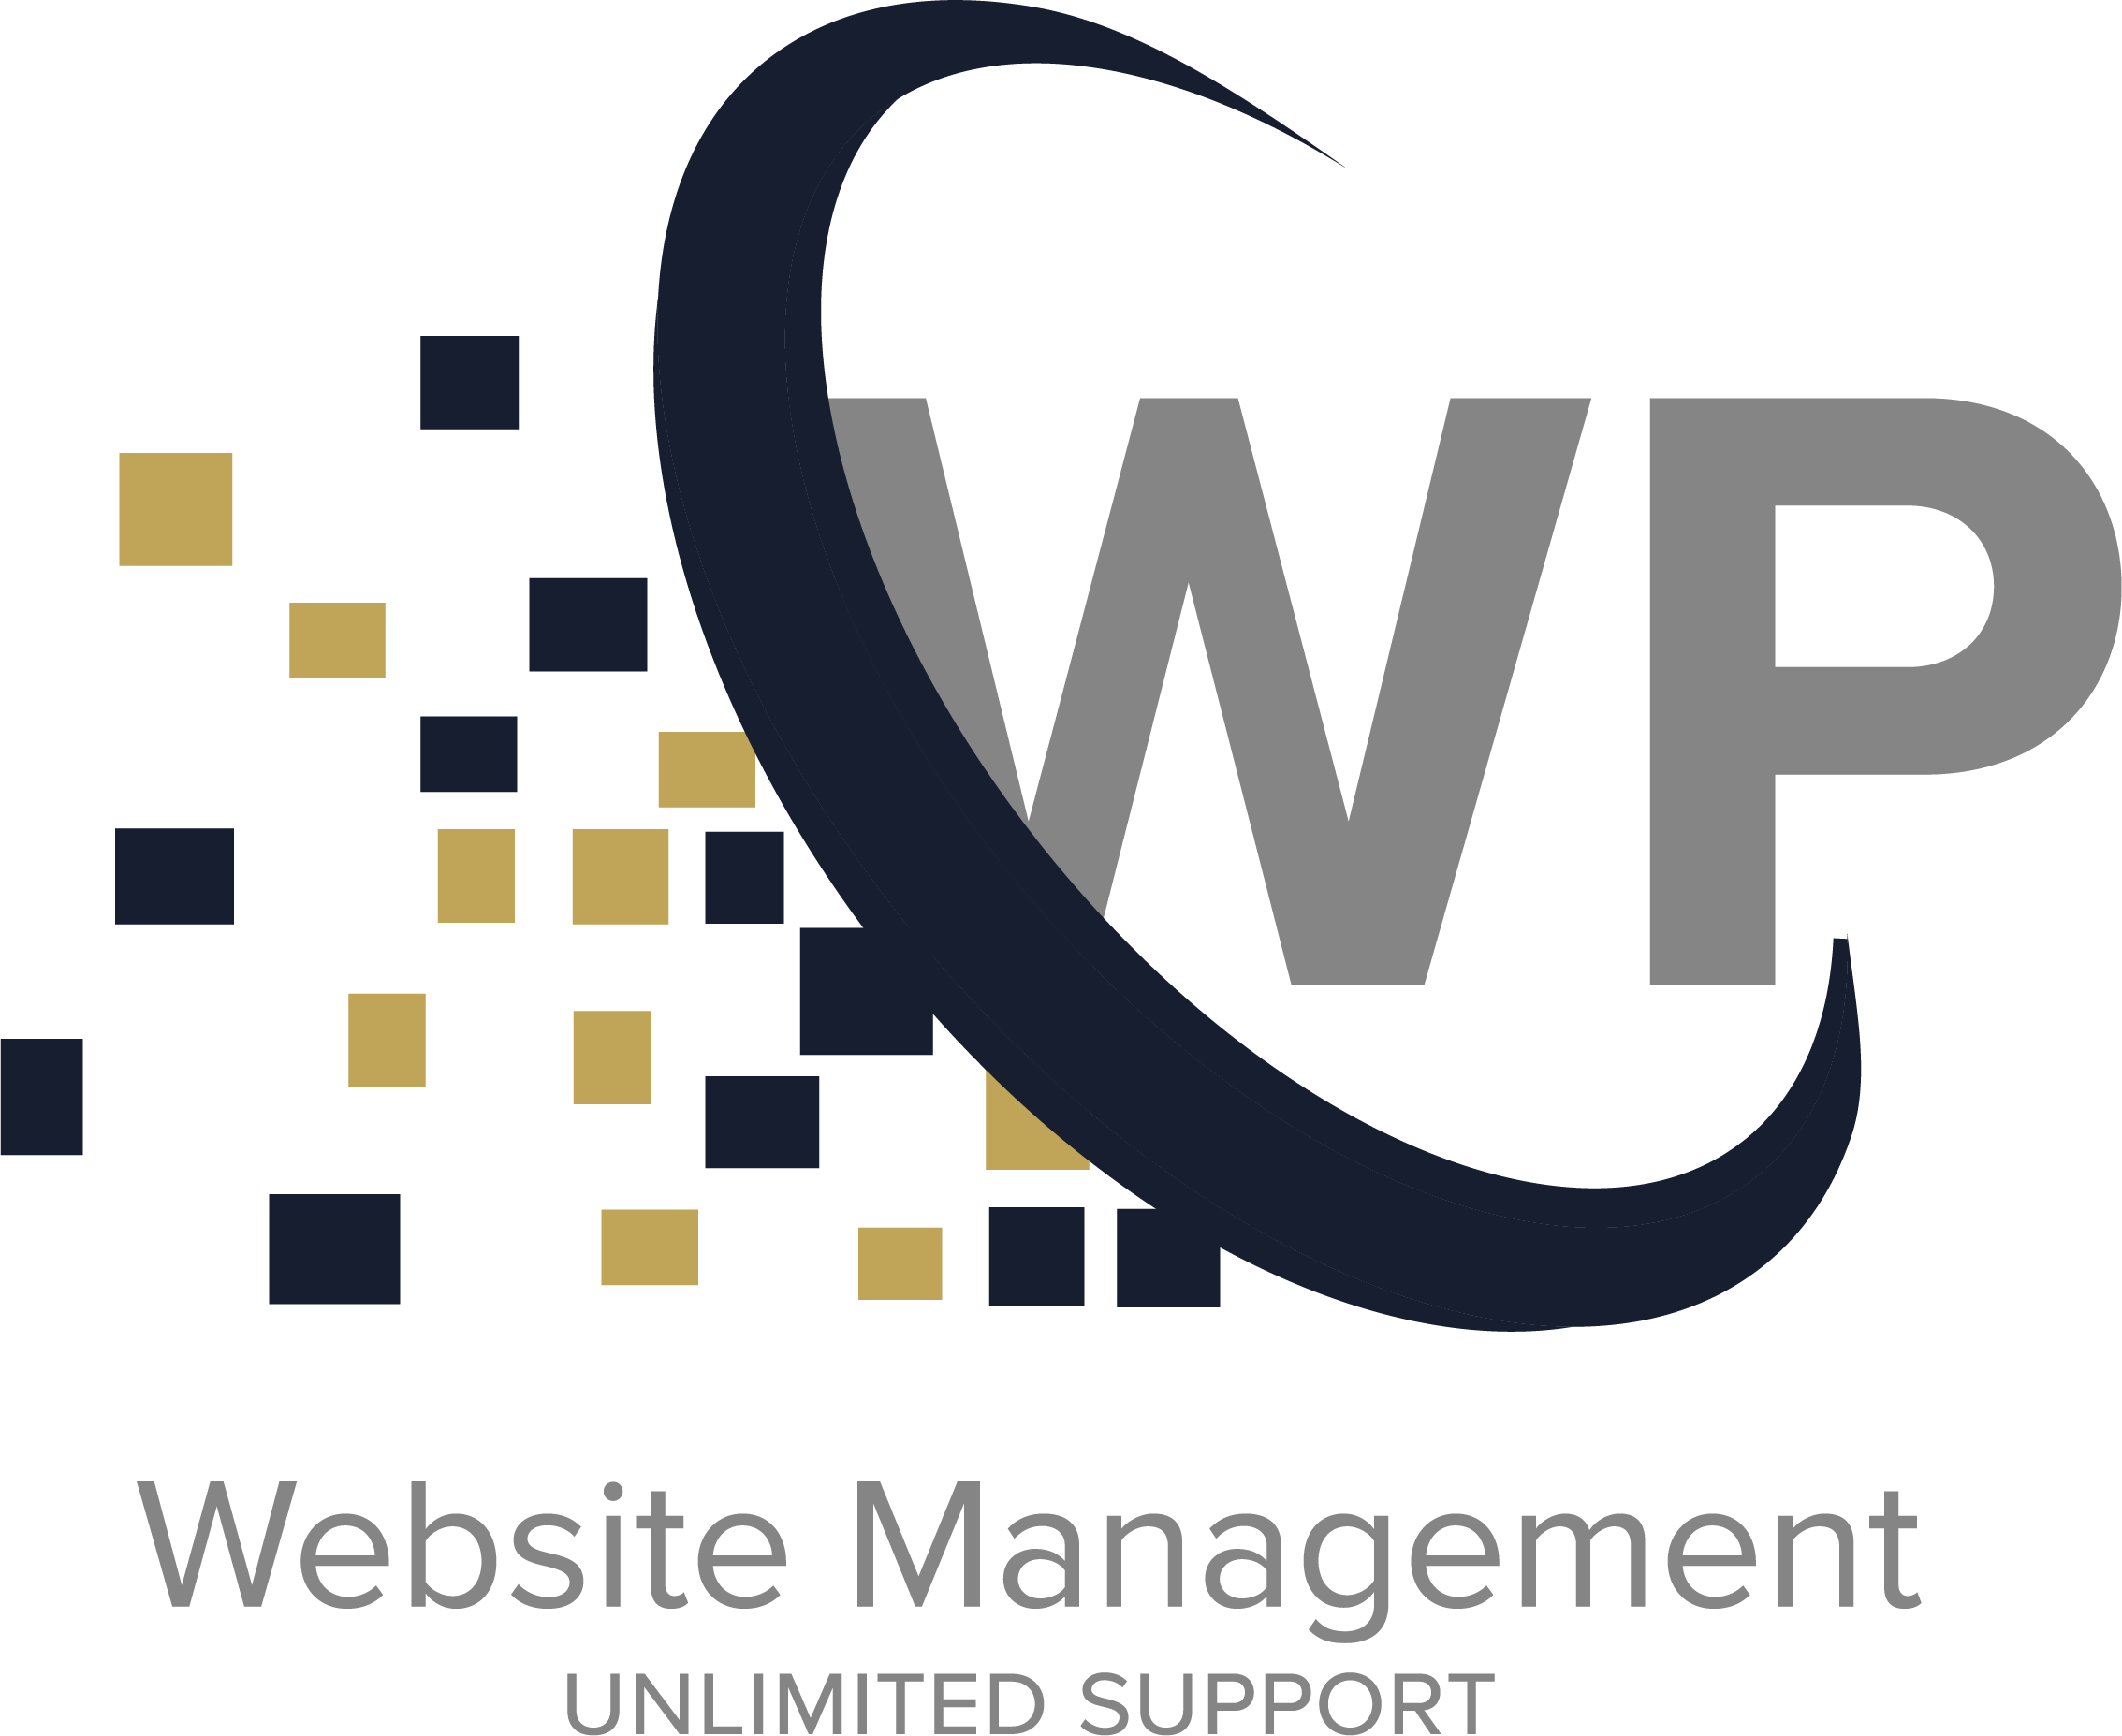 WordPress Website Management Delivers End-to-End Solutions for WordPress Site Owners